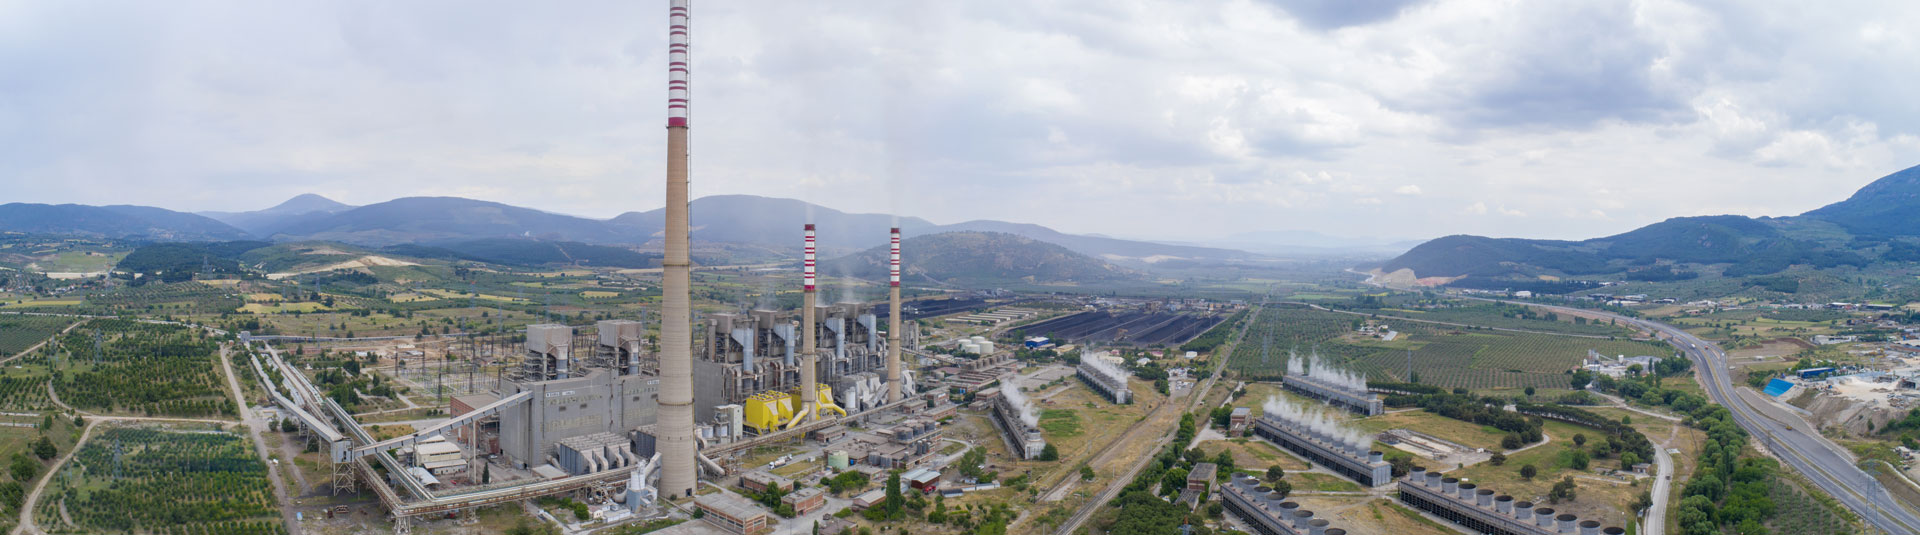 Soma Thermal Powerplant (Electricity Generation Corporation)